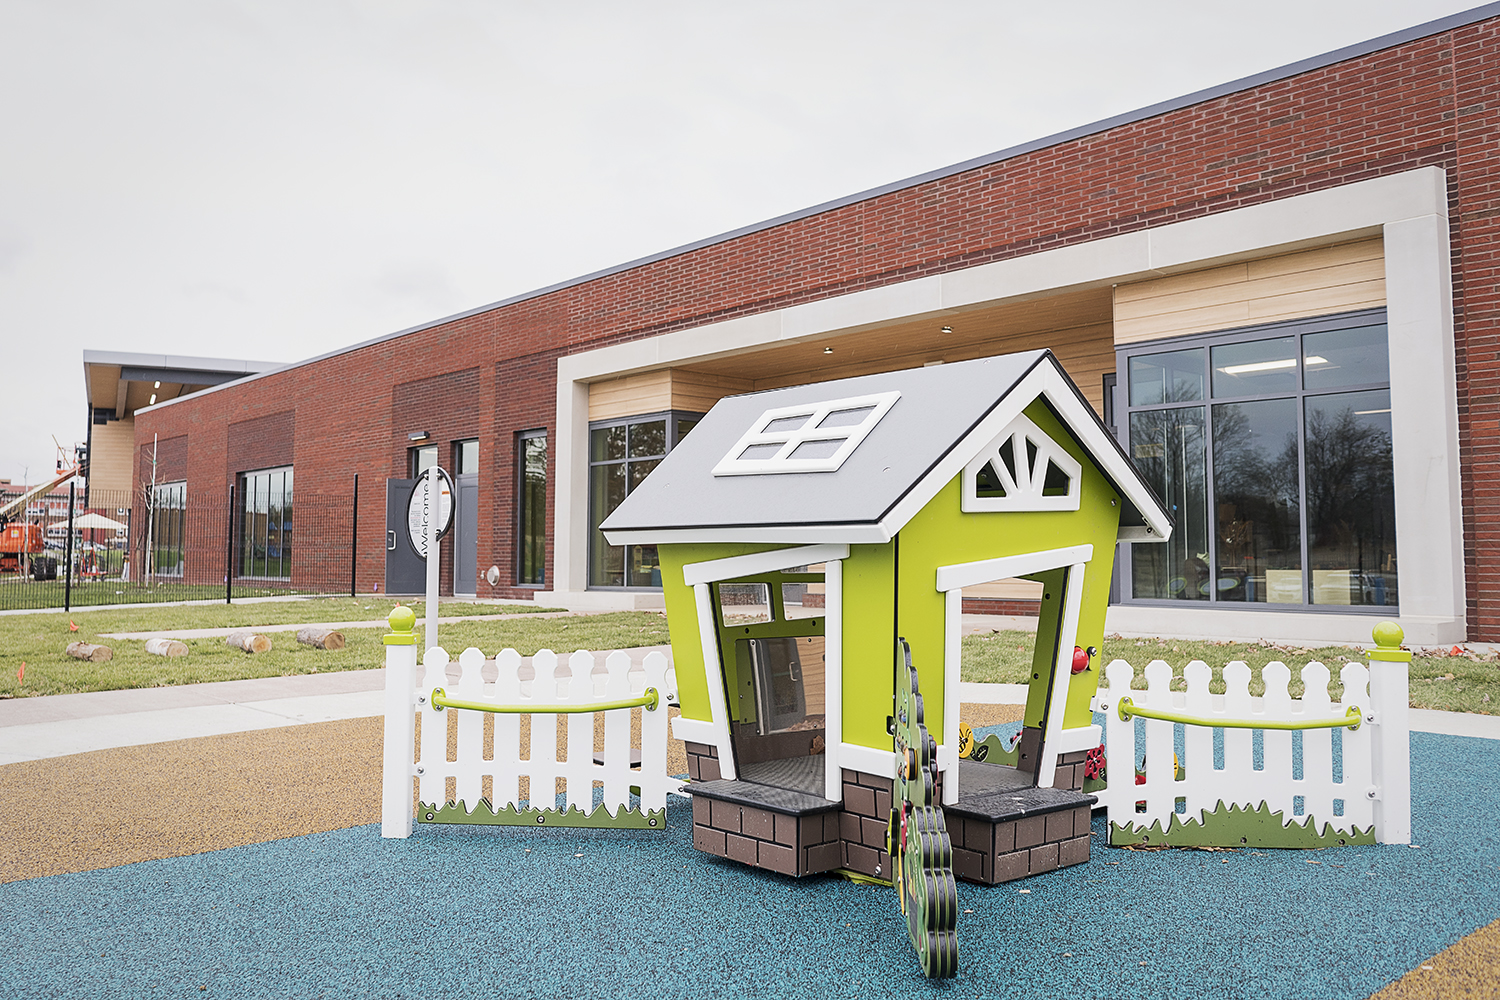 Flint, MI - Tuesday, November 21, 2017: A small playhouse sits outside of the new Educare Center in Flint in the attached play space outside of one of the classrooms.